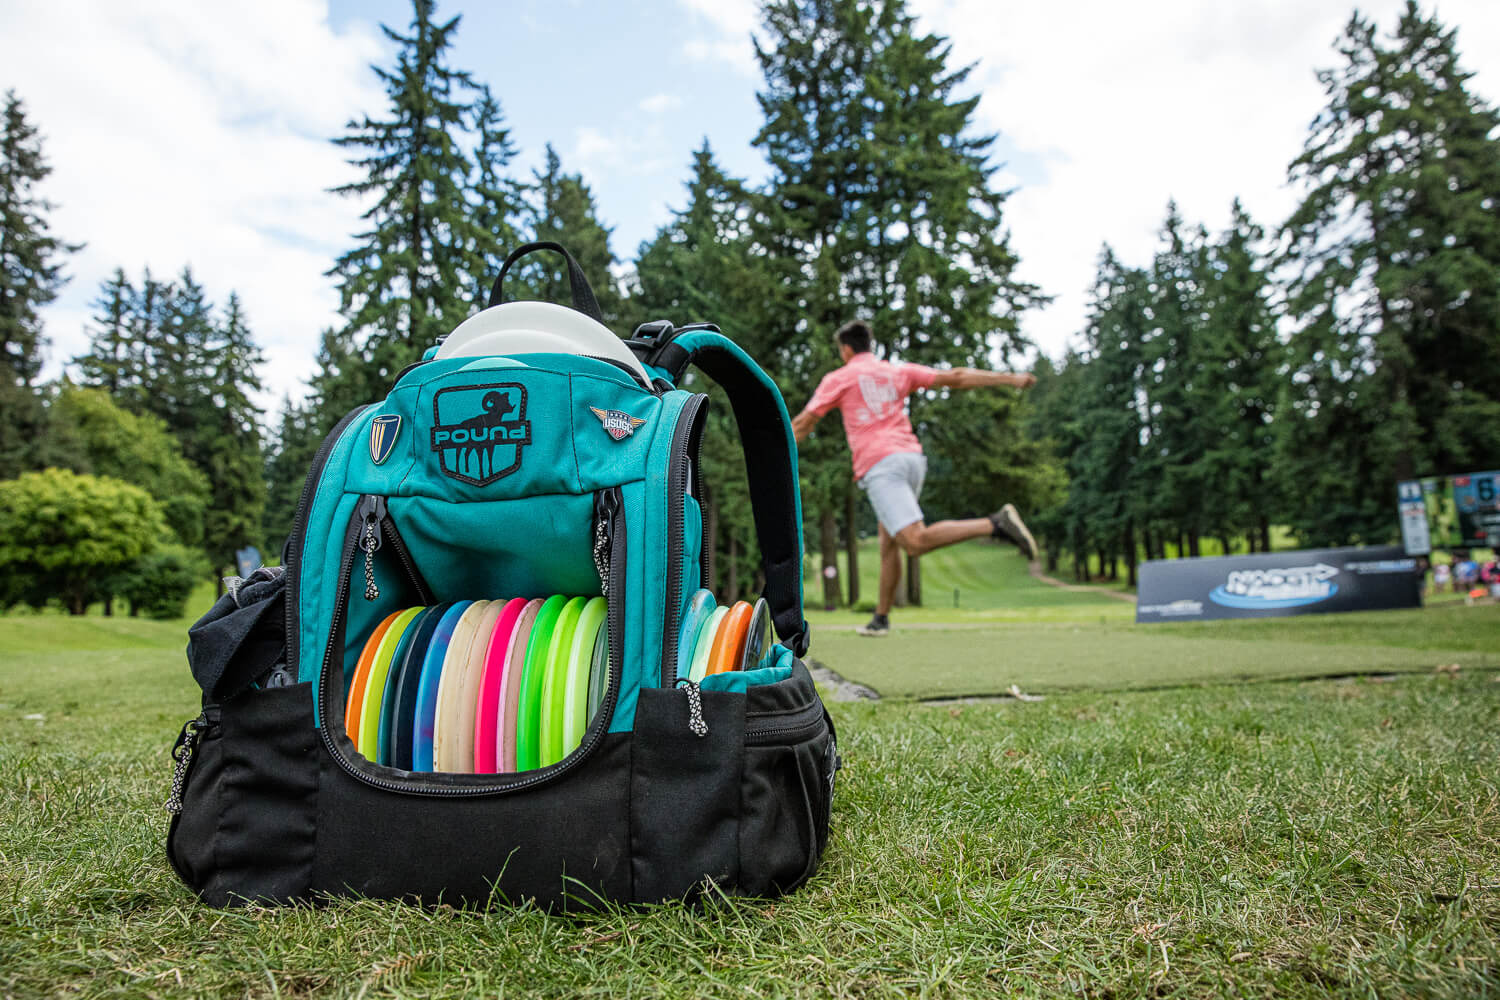 Top 6 Things to Consider when Buying a Disc Golf Bag